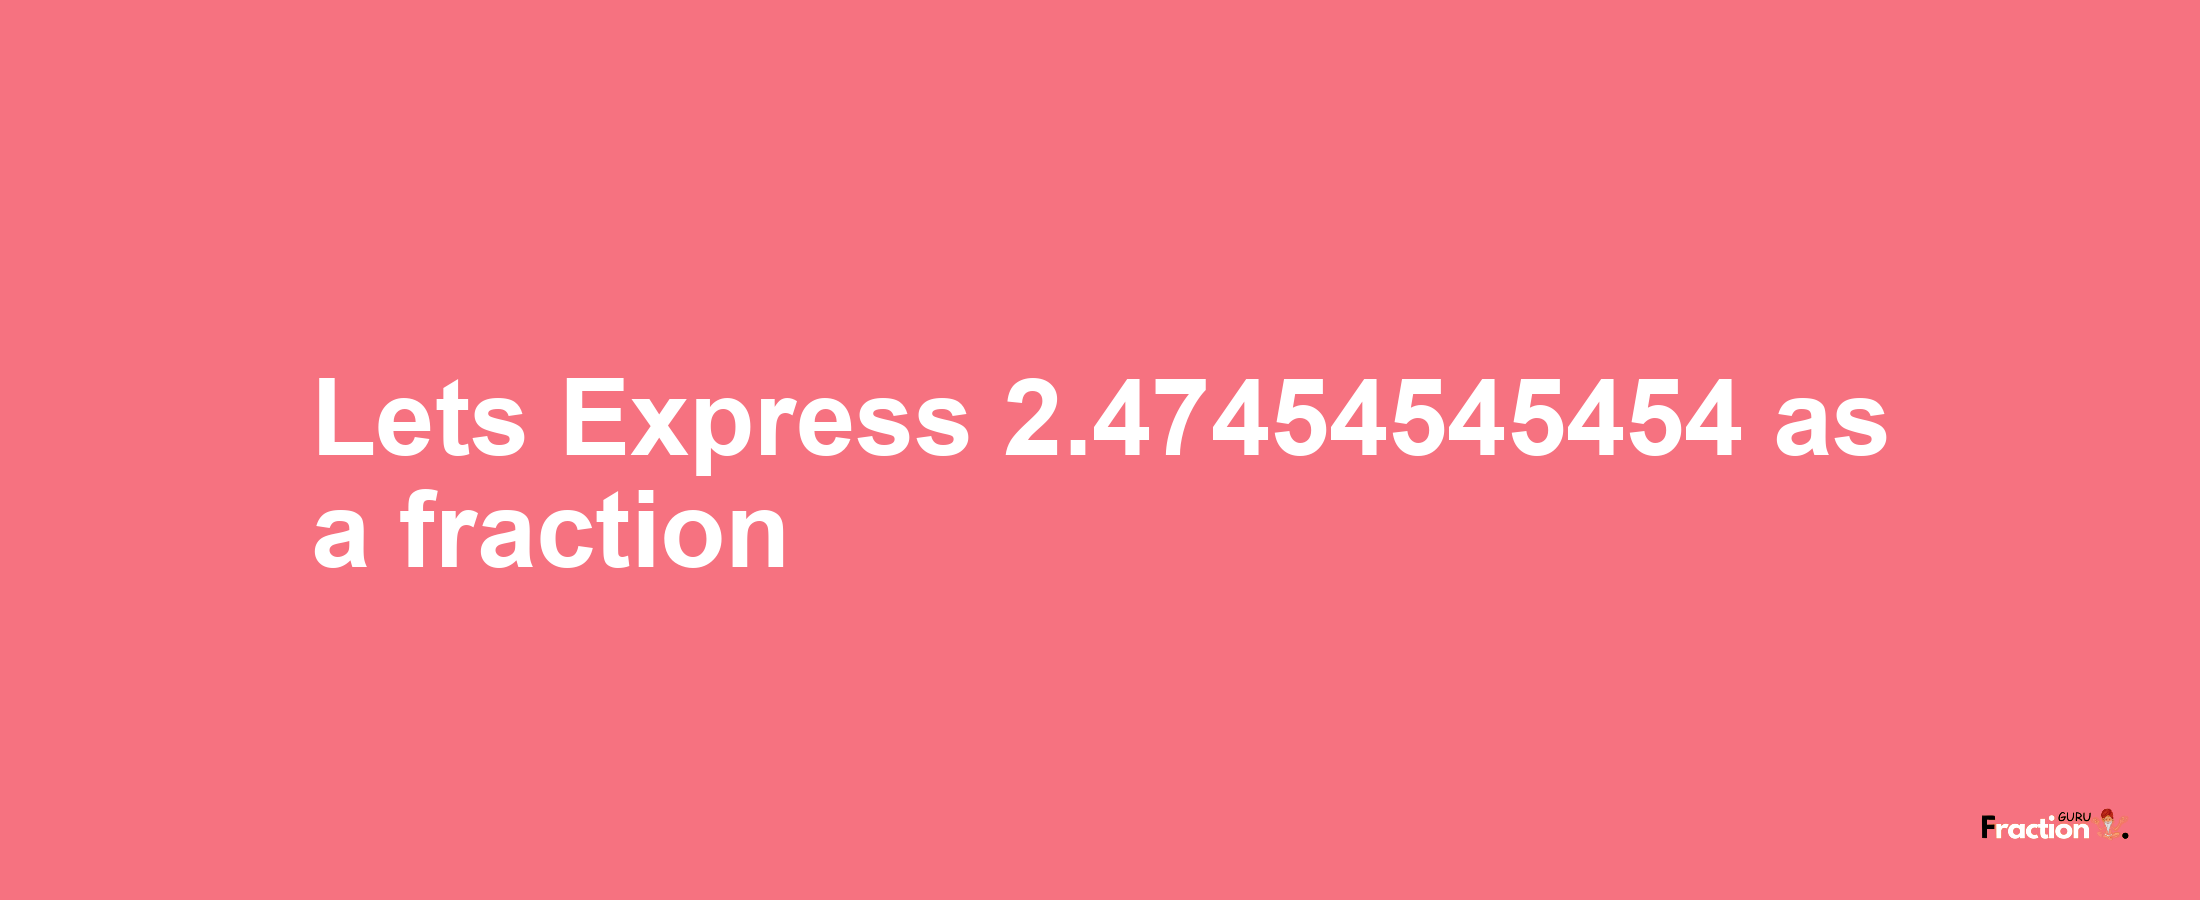 Lets Express 2.47454545454 as afraction